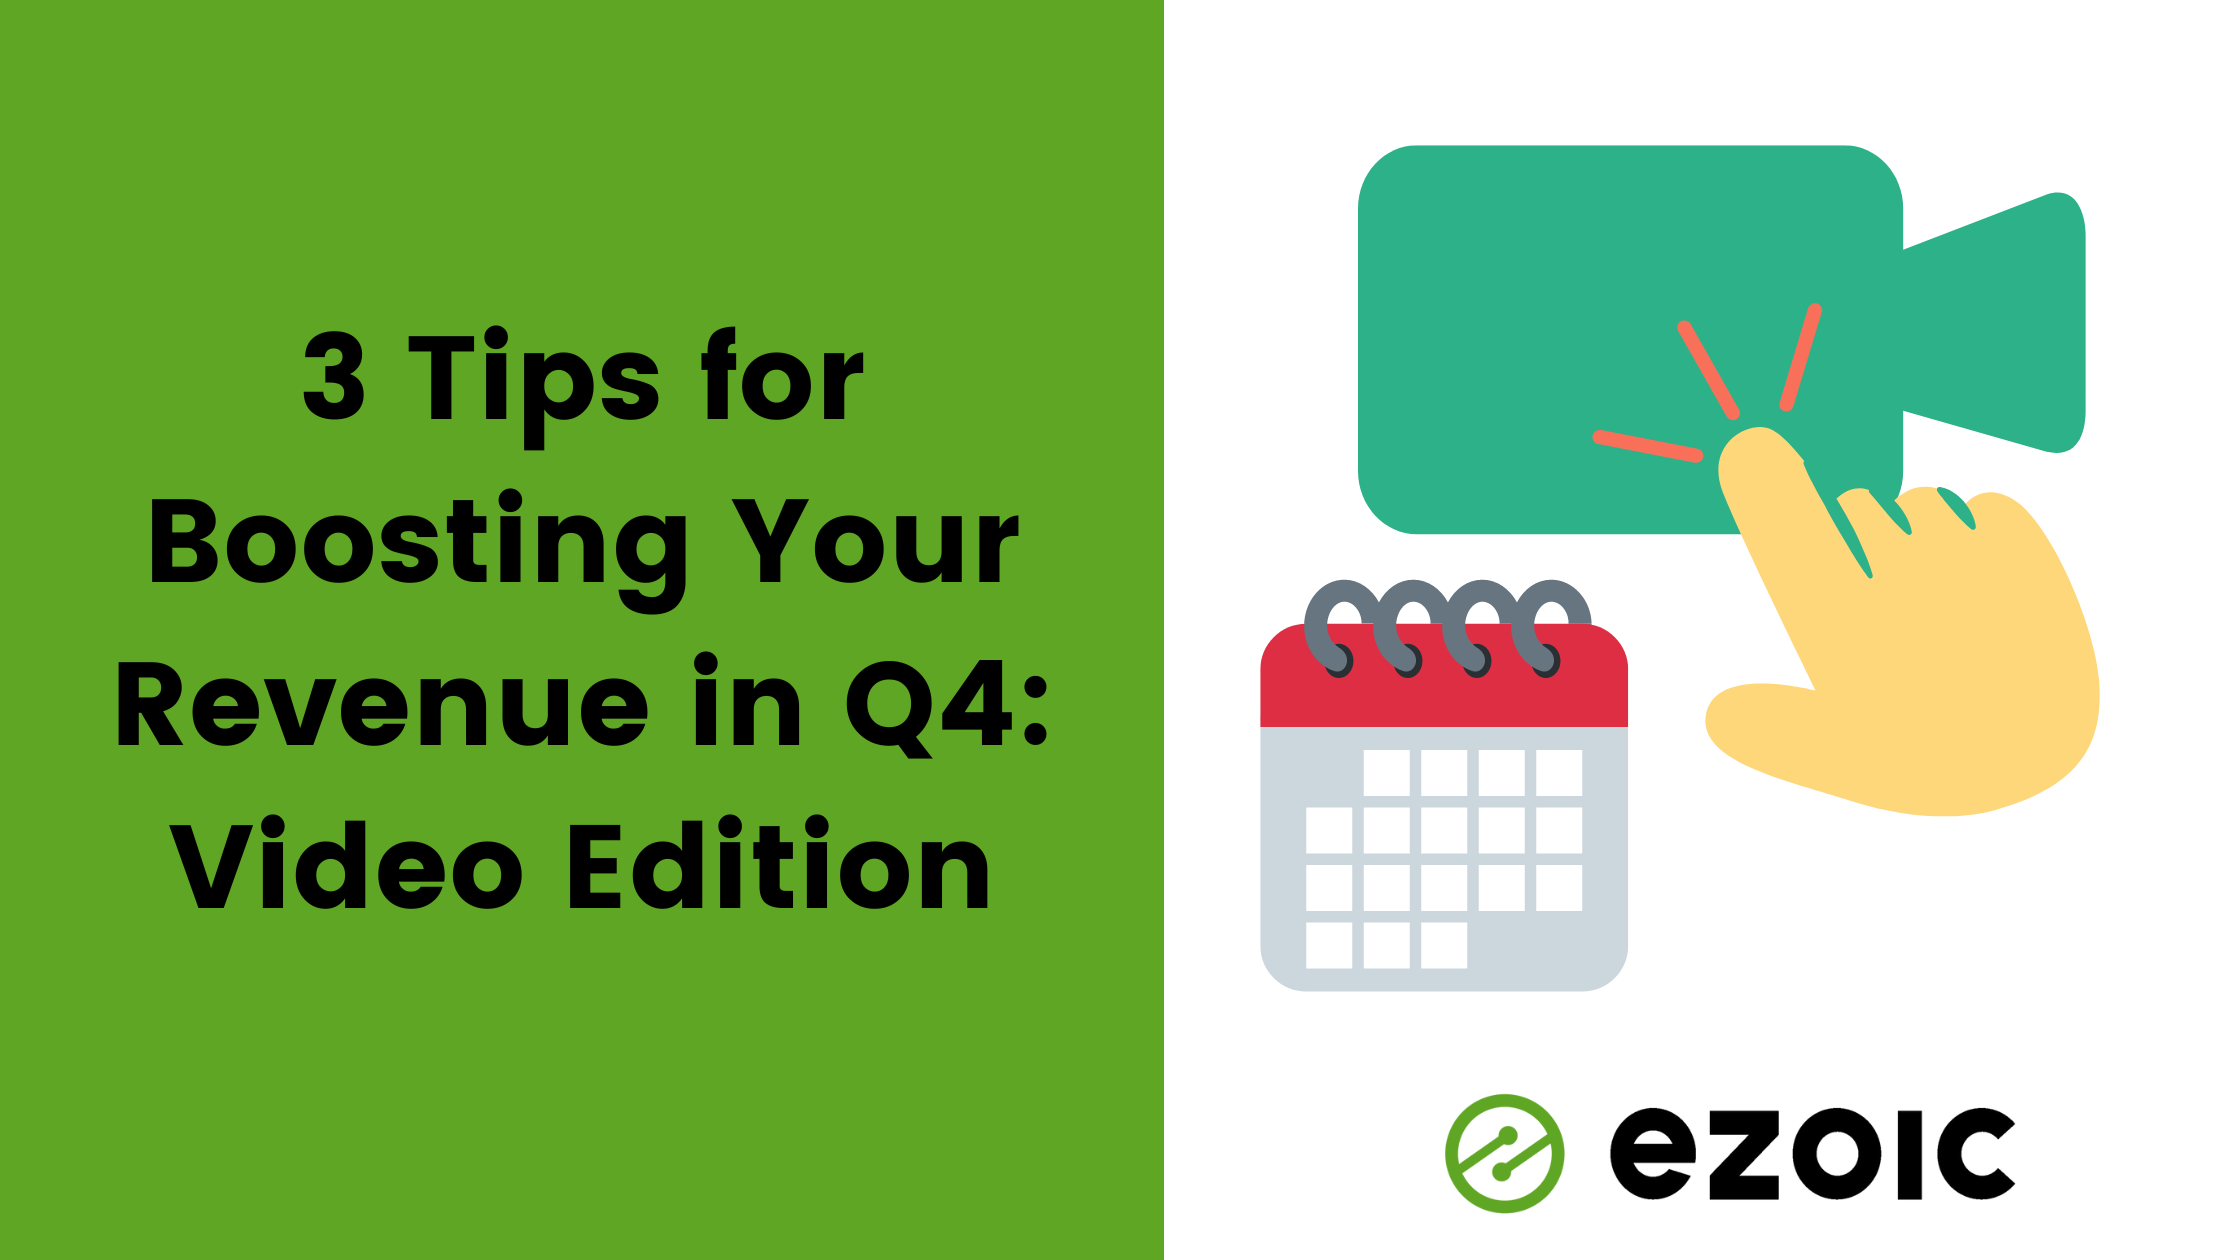 3 Easy Tips to Boost Revenue in Q4: Video Edition